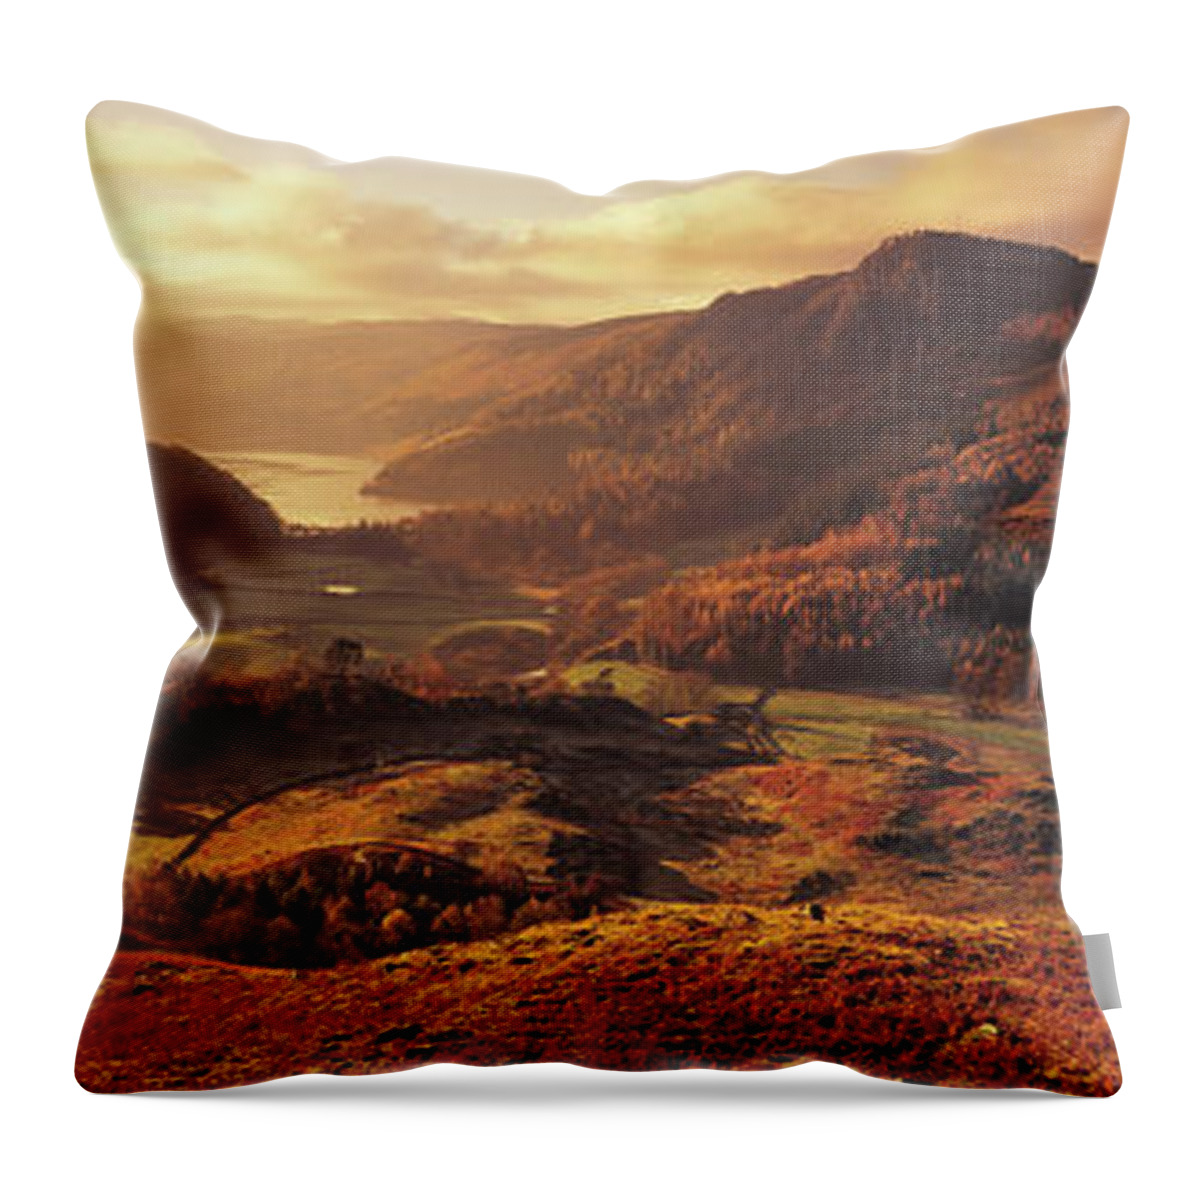 Scenics Throw Pillow featuring the photograph England, Lake District, Thirlmere by Peter Adams